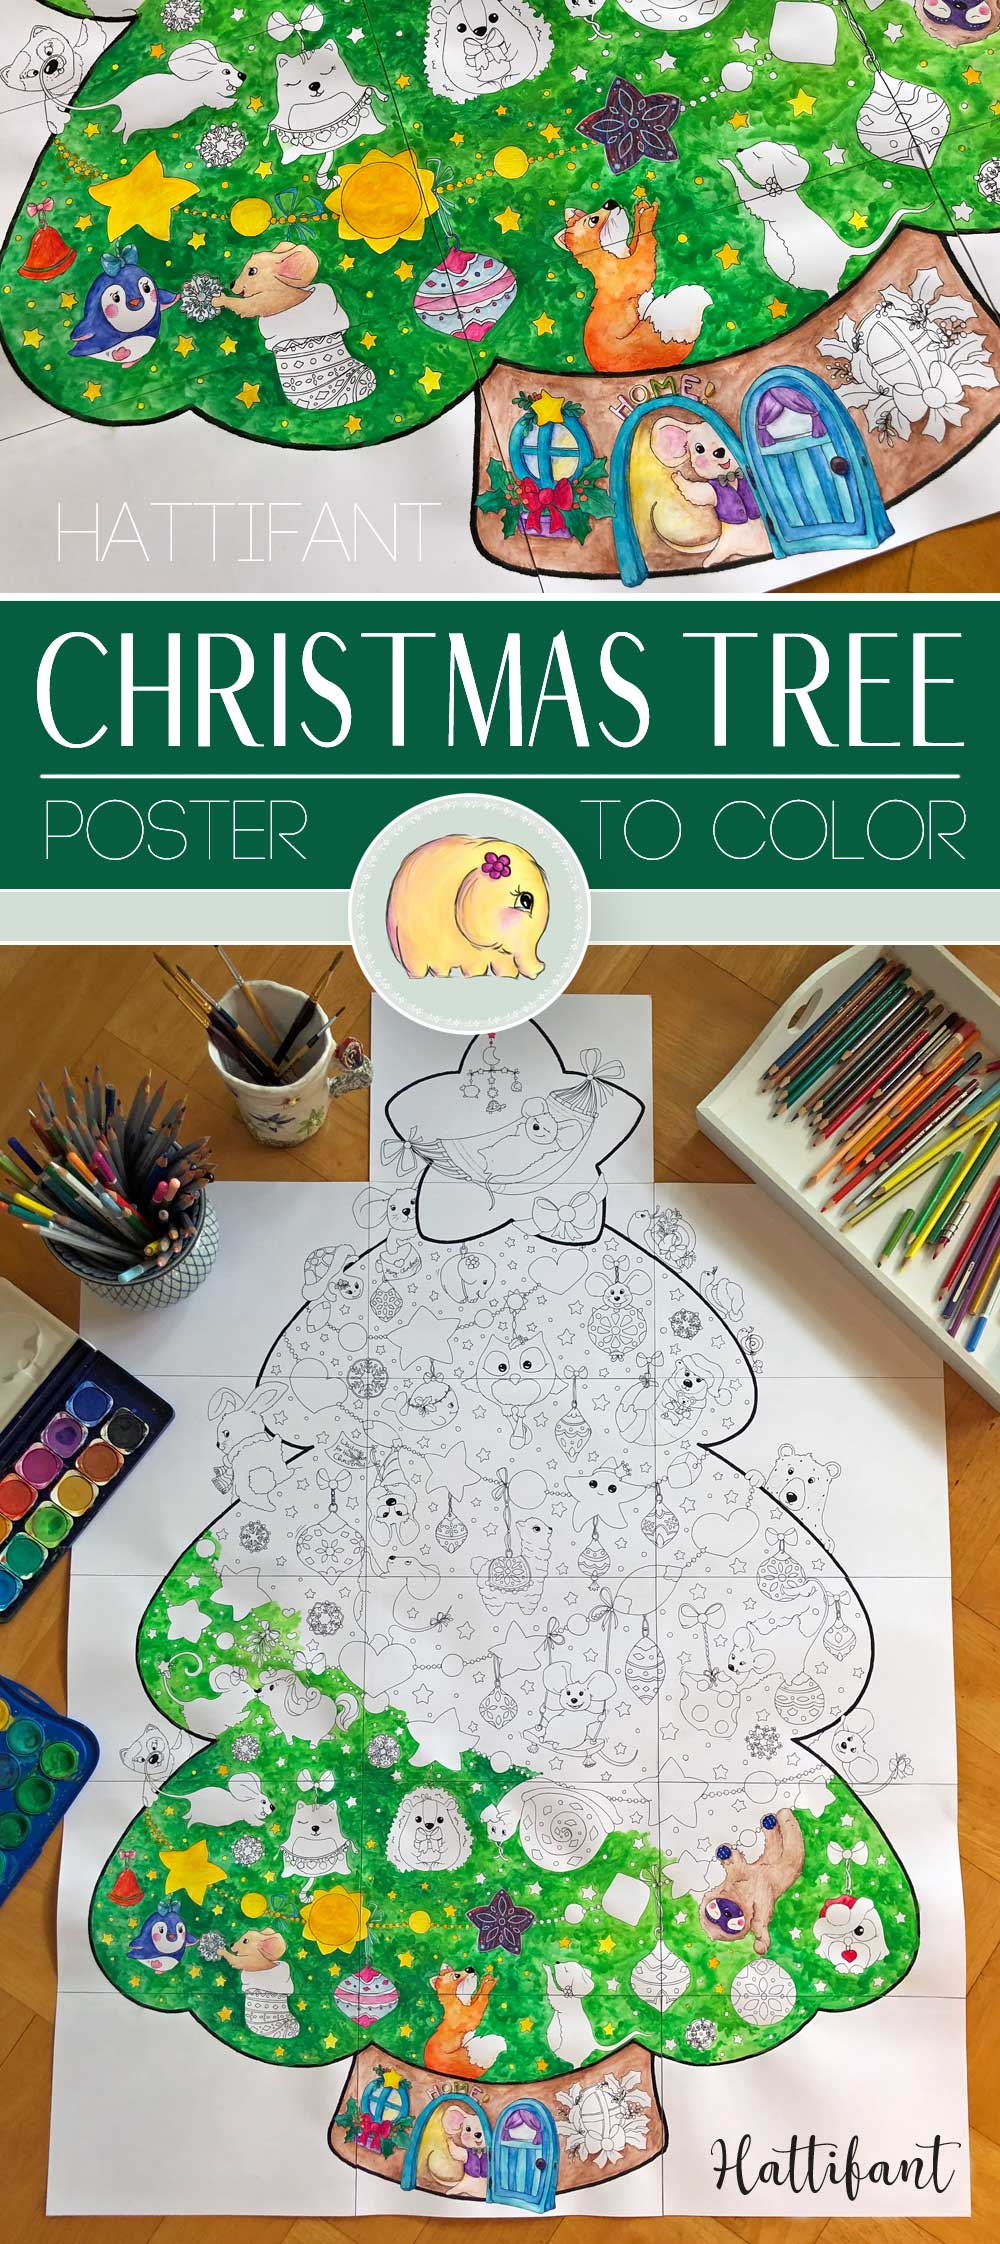 Pasimy 4 Pcs 45x32 Inch Christmas Giant Coloring Poster for Kids with 24  Color Crayon Winter